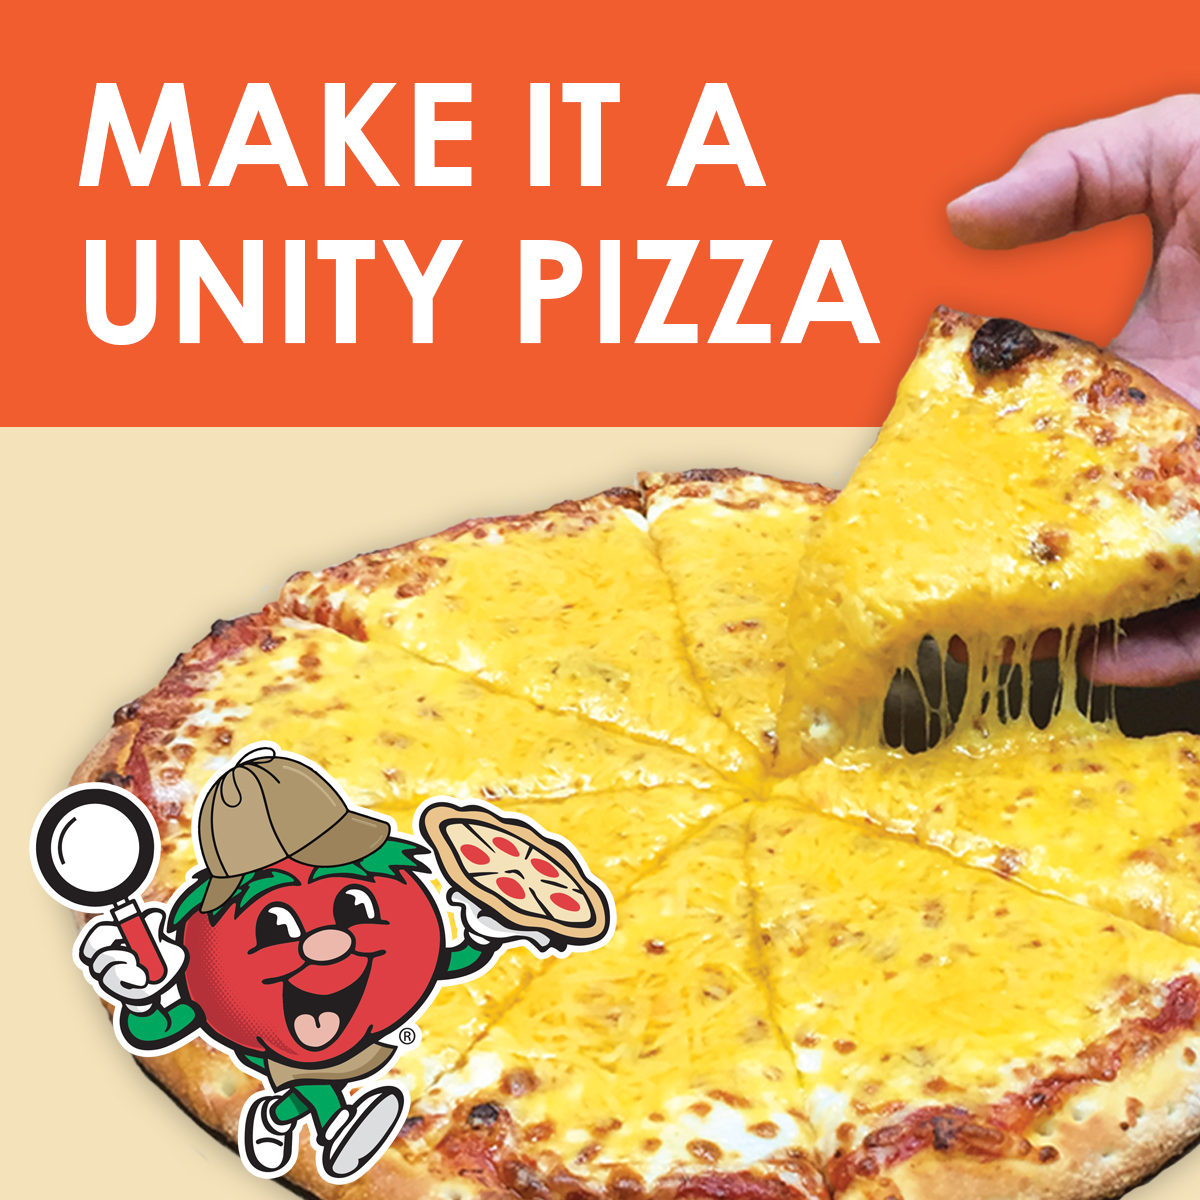 Unity Pizza – Snappy Tomato Pizza
In support of National Bullying Prevention Month and celebrating National Pizza Month, donations of a $1 change any round medium or large Snappy Tomato Pizza into a Unity Pizza.  We added cheddar cheese to represent the color of Unity Day and each $1 was donated to PACER’s National Bullying Prevention Center. “Add Cheddar and Make It Better” Total raised $5,818.
Visit SnappyTomato.com/UnityPizza for more information. 
#SnappyTomato
